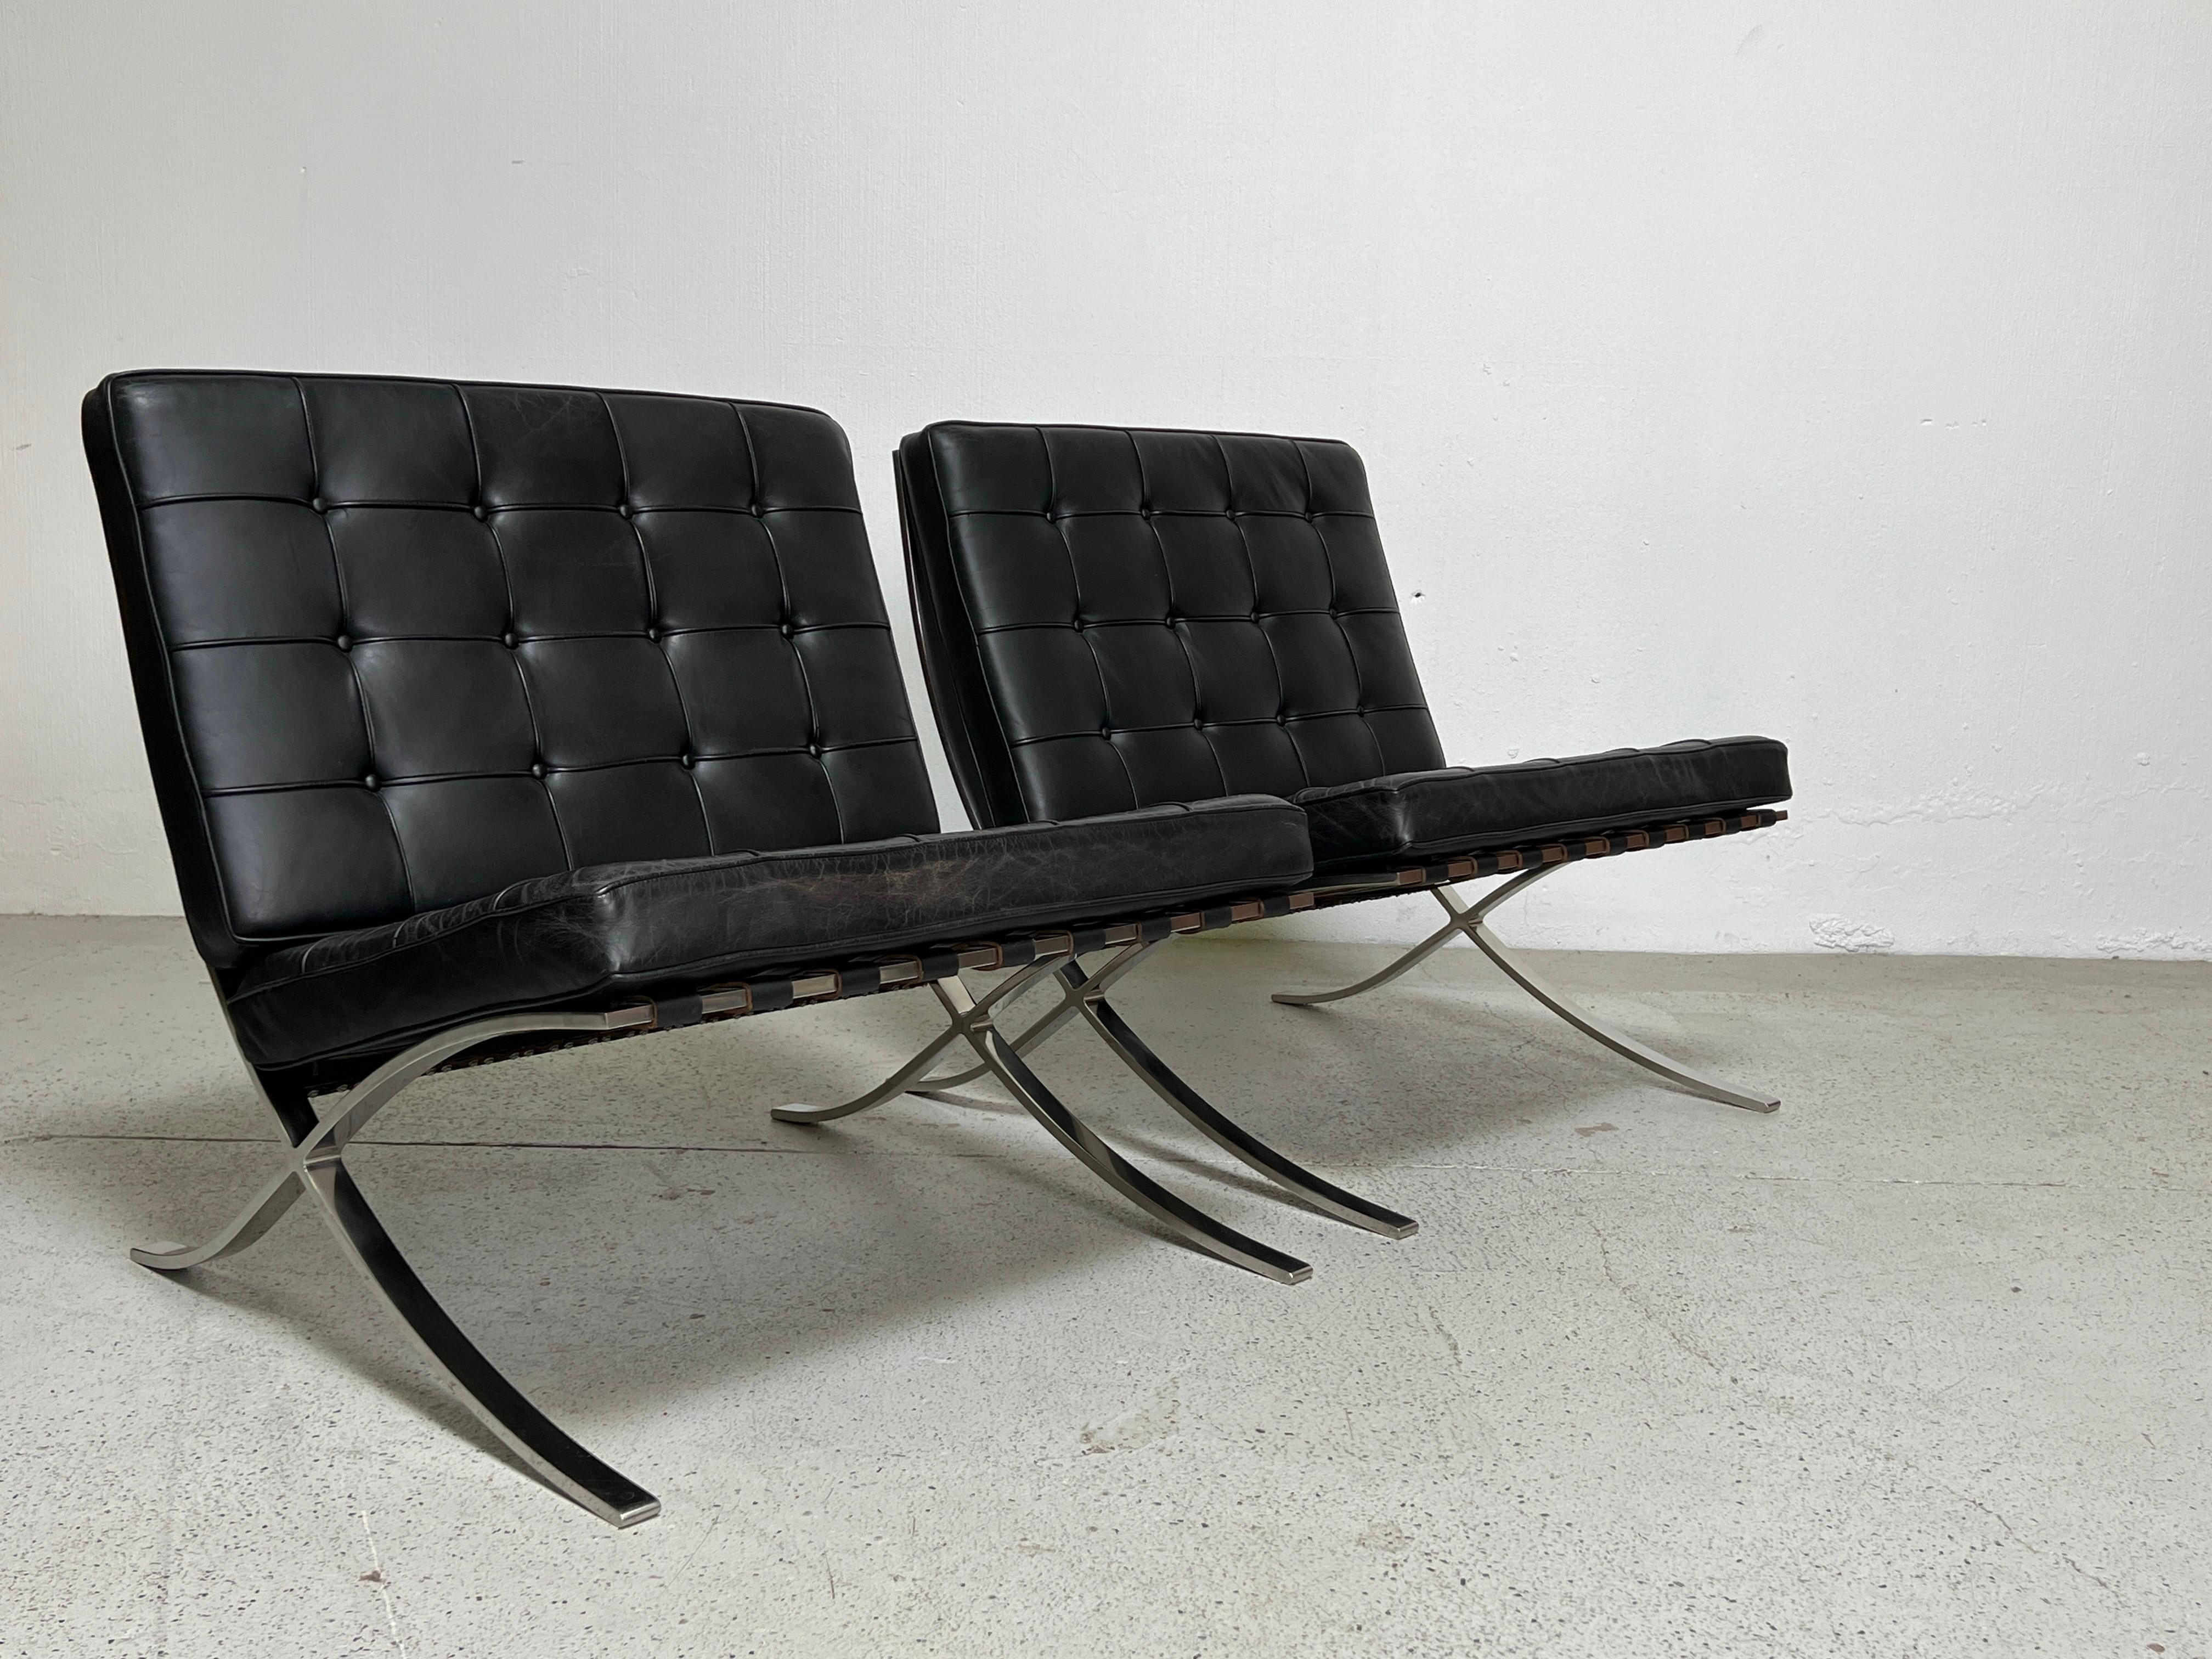 Mid-20th Century Pair of Vintage Barcelona Chairs by Mies van der Rohe For Sale